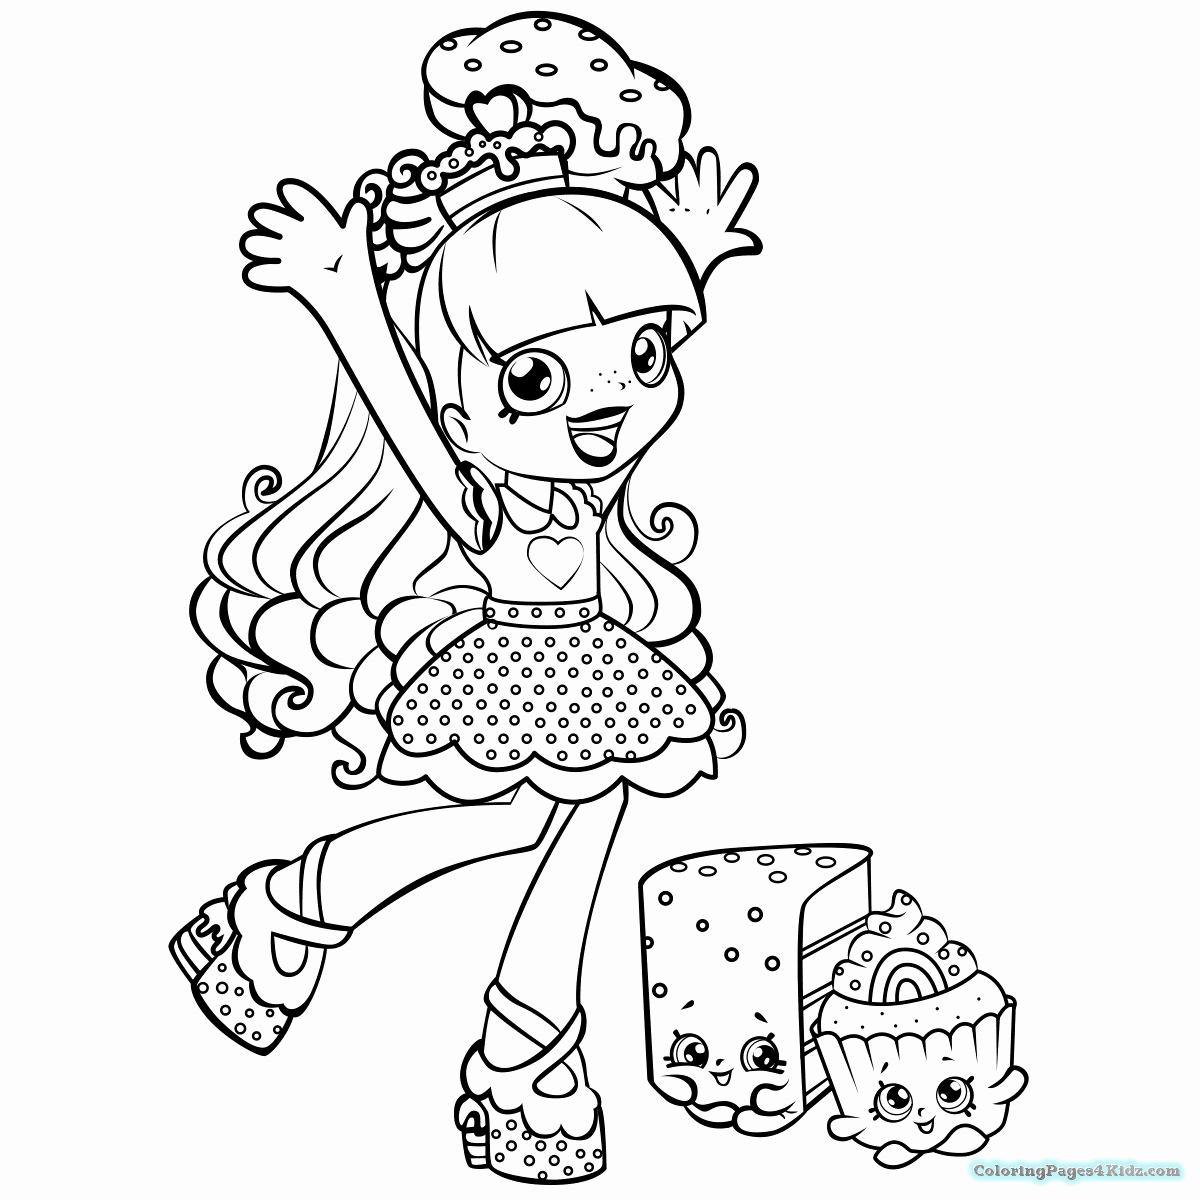 Shopkins Characters Coloring Pages at GetColorings.com | Free printable ...